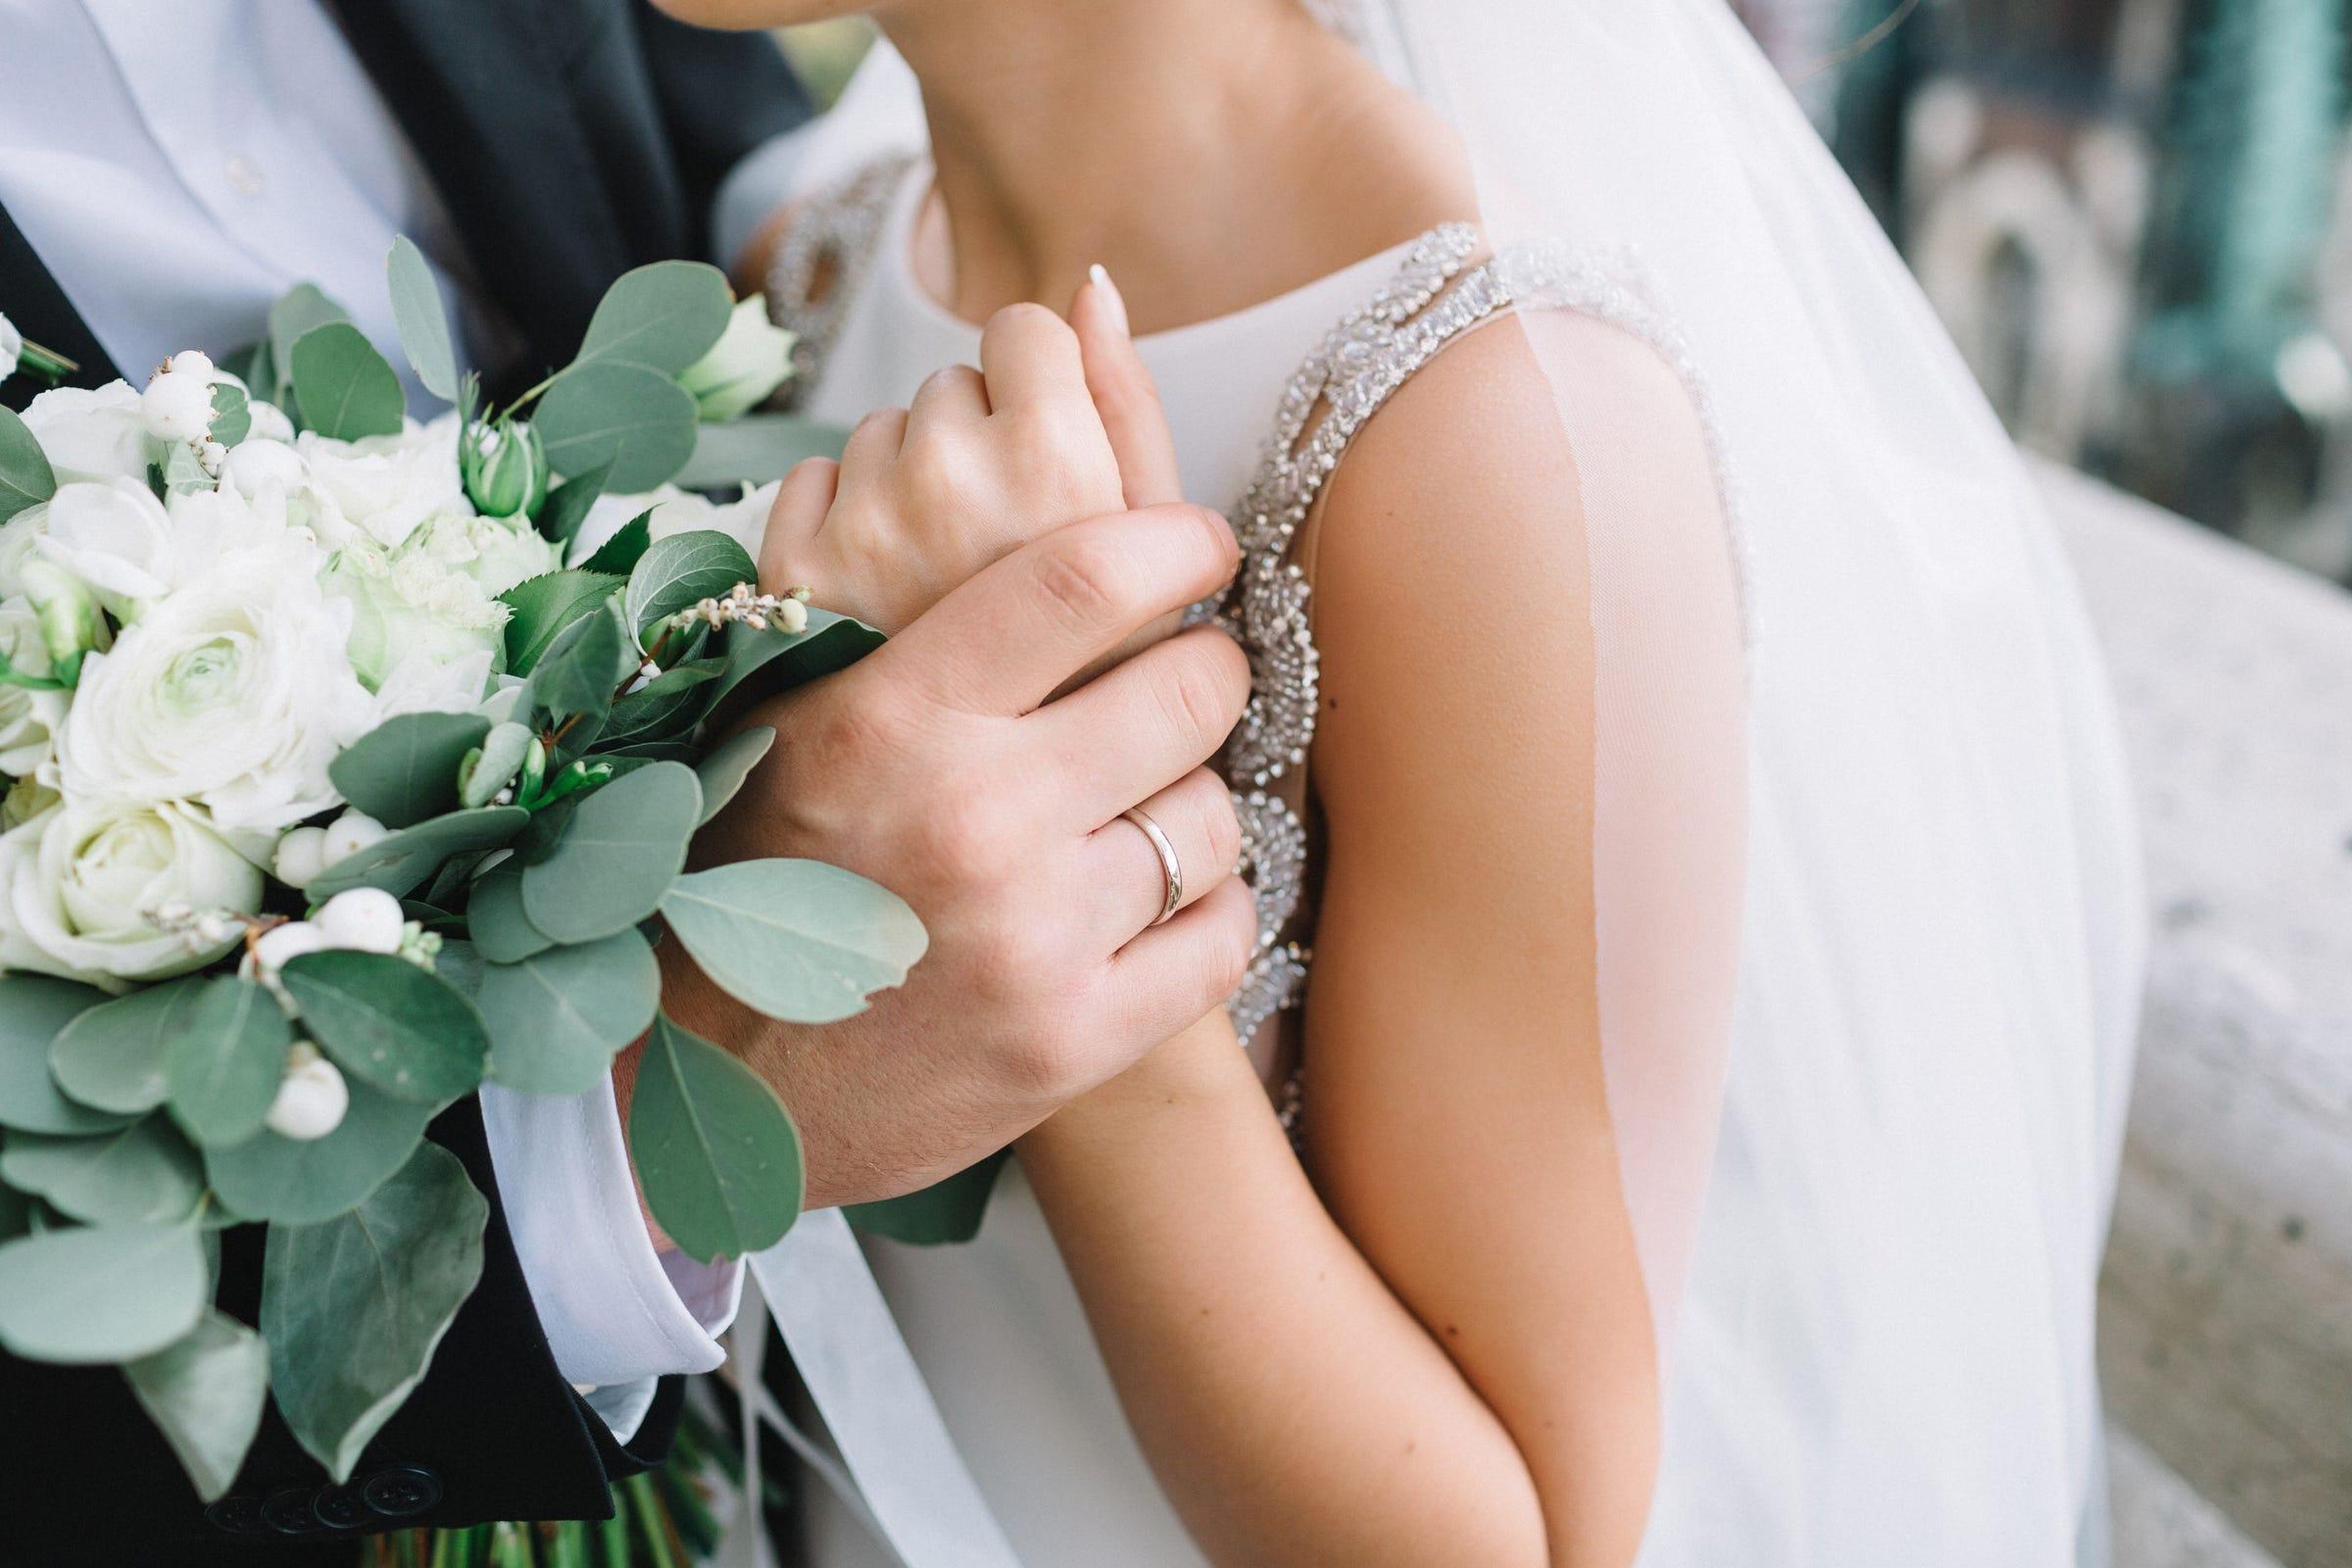 There are a few ways to cut costs without negatively impacting the quality of your wedding.